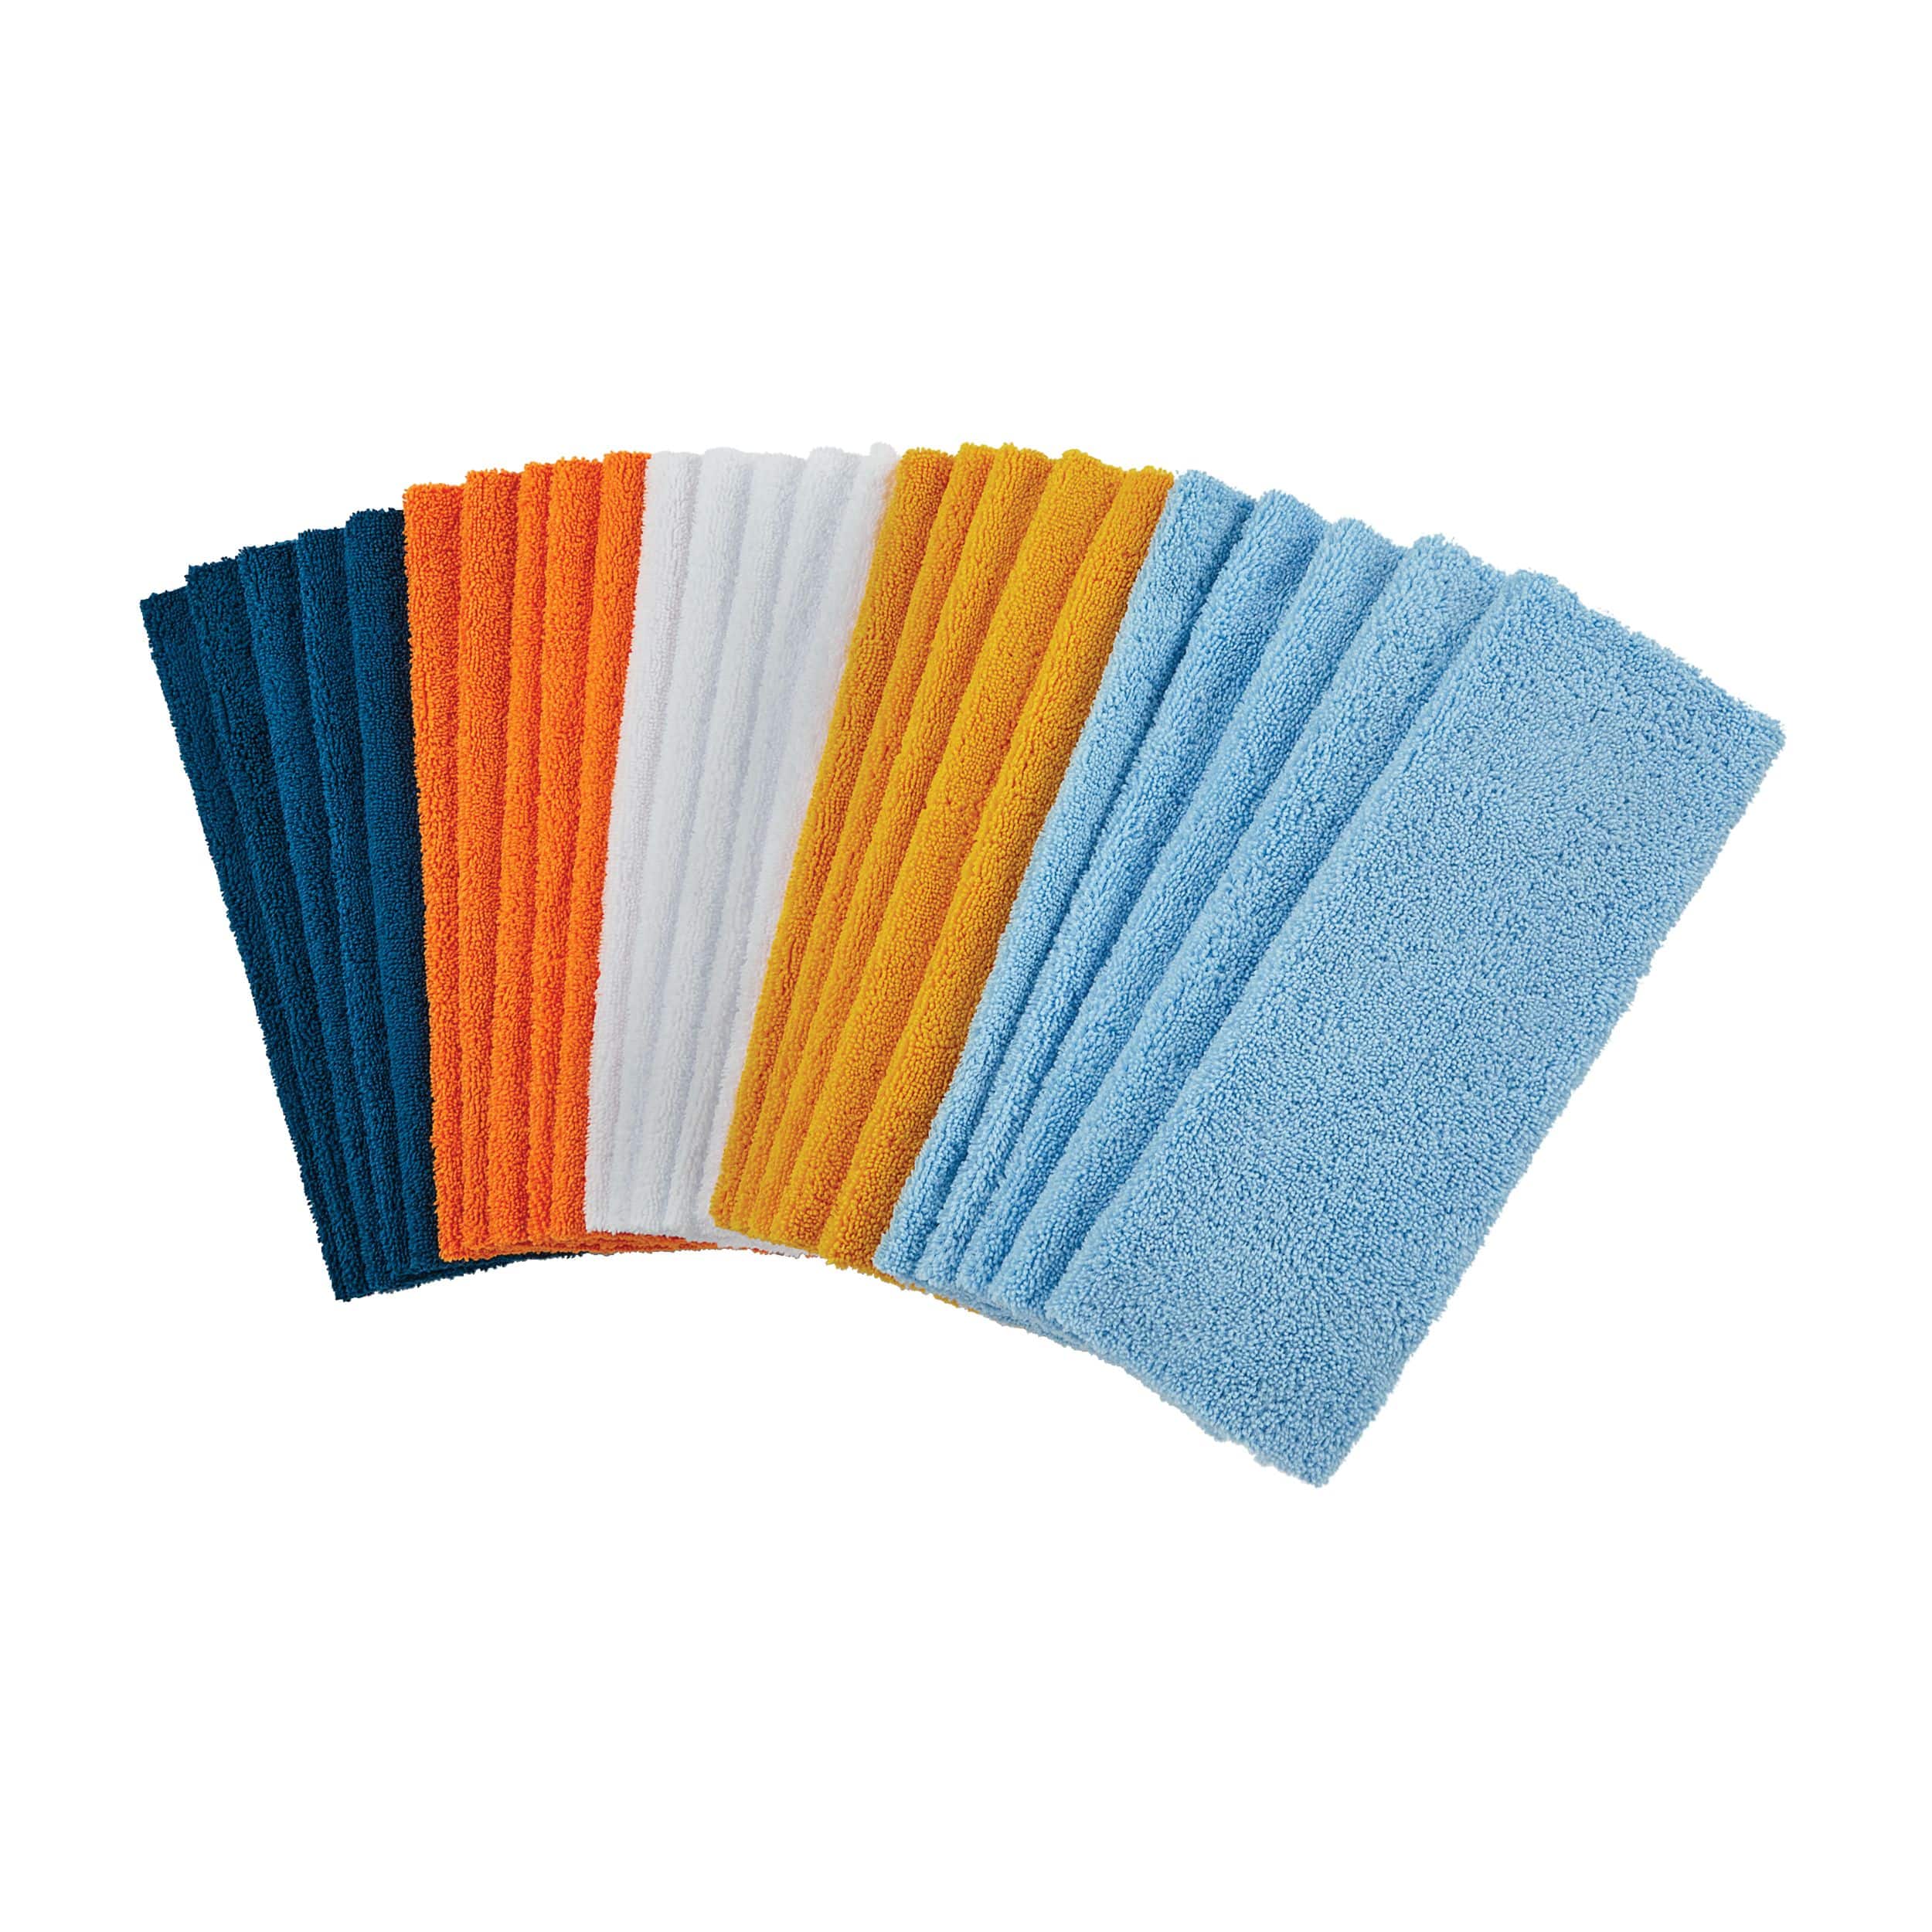 https://media-www.canadiantire.ca/product/automotive/car-care-accessories/auto-cleaning-tools/0396631/simoniz-microfibre-cloths-25-pack-01f8f340-3838-43e4-8156-ab4aa7bdcd52-jpgrendition.jpg